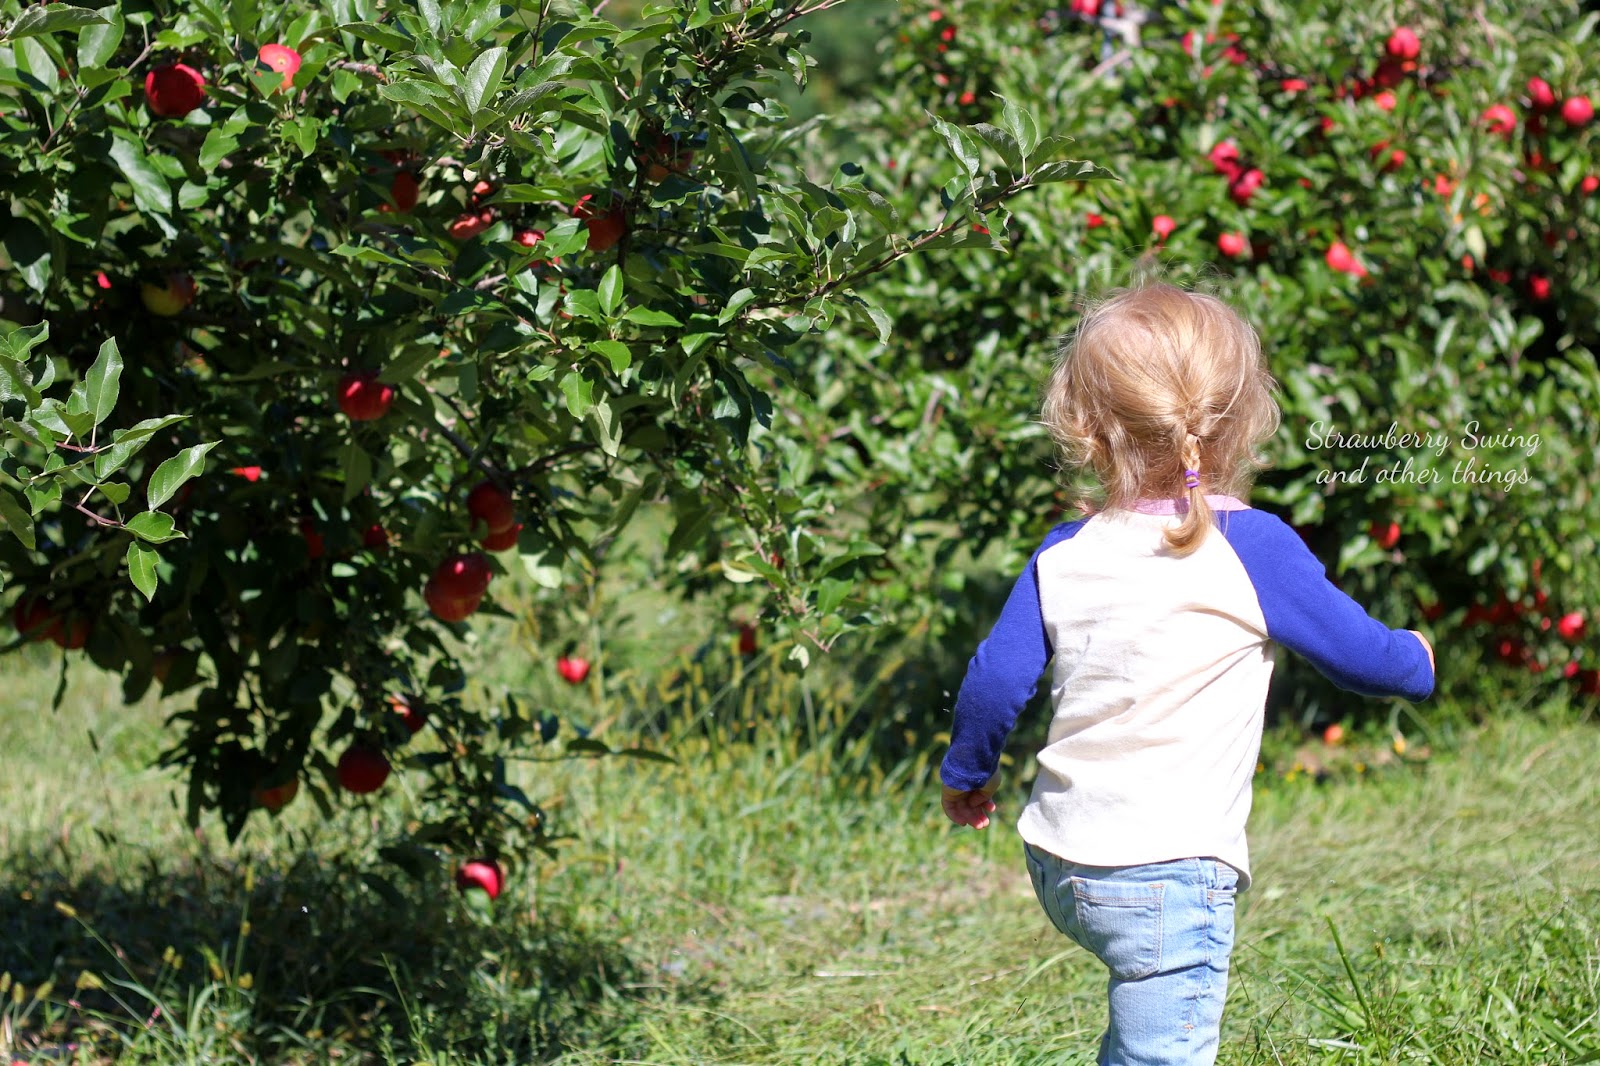 Strawberry Swing and other things: If you give a toddler an apple...